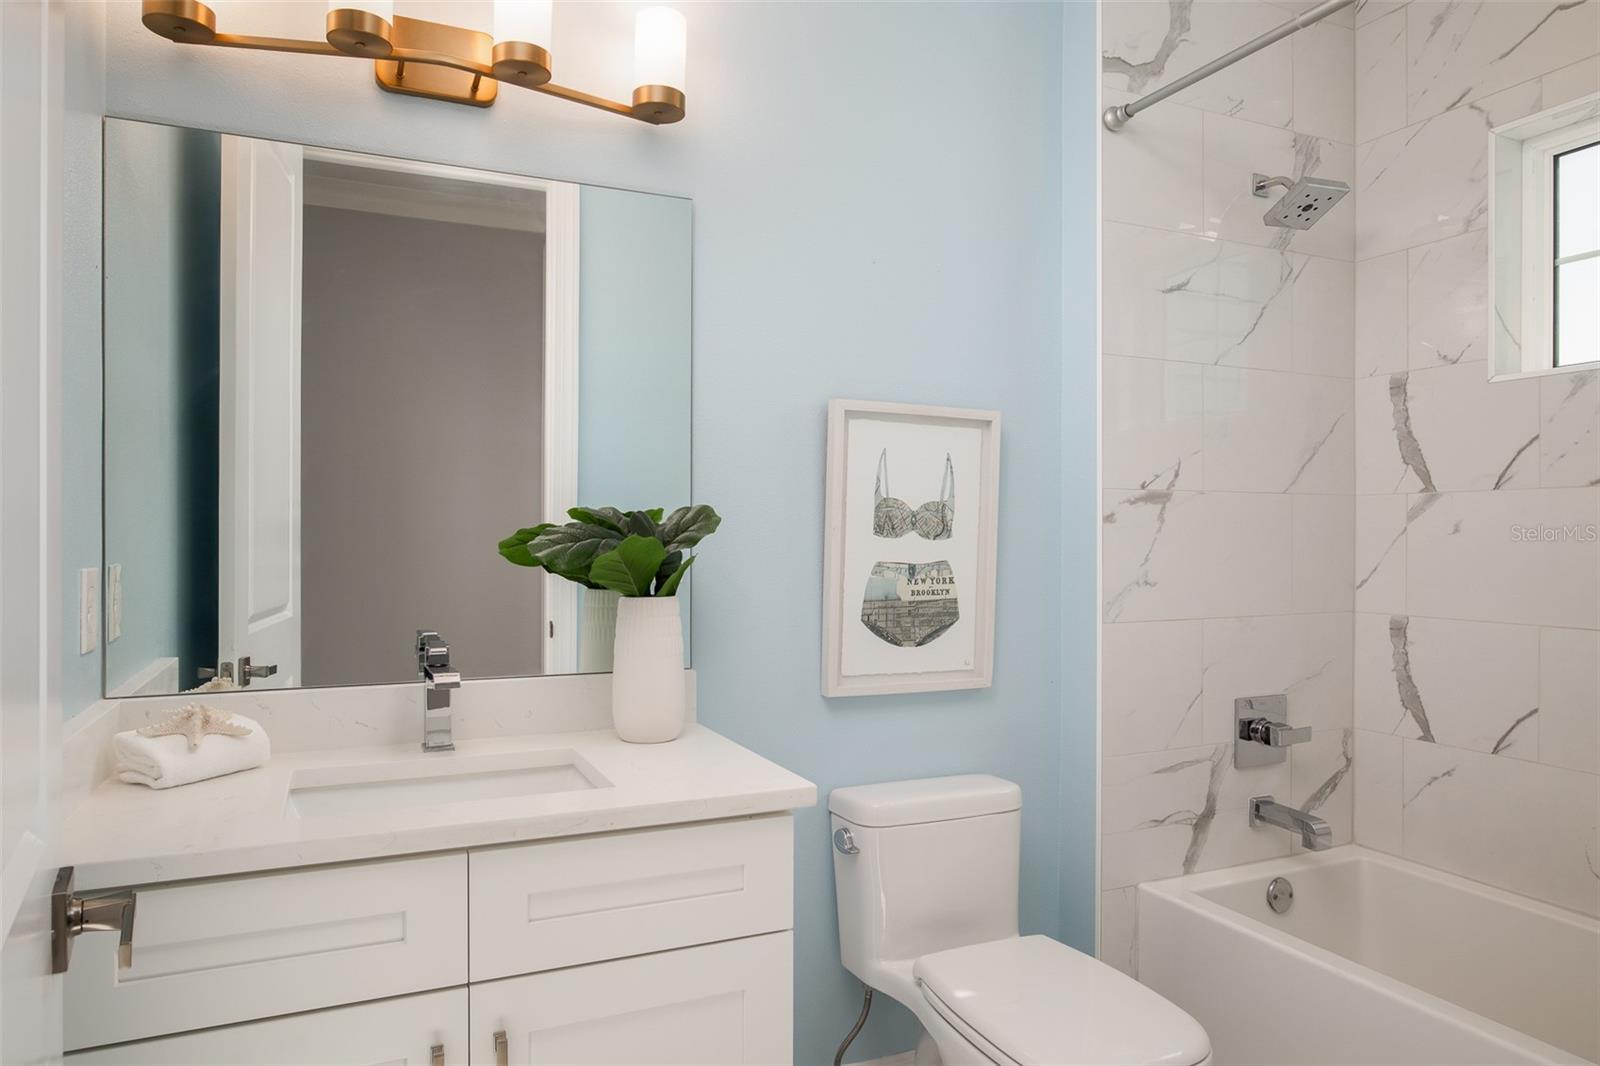 Indulge in the opulence of the first full bath, adorned with luxury stone countertops, offering a refined touch of coastal elegance and sophistication to your daily routine.